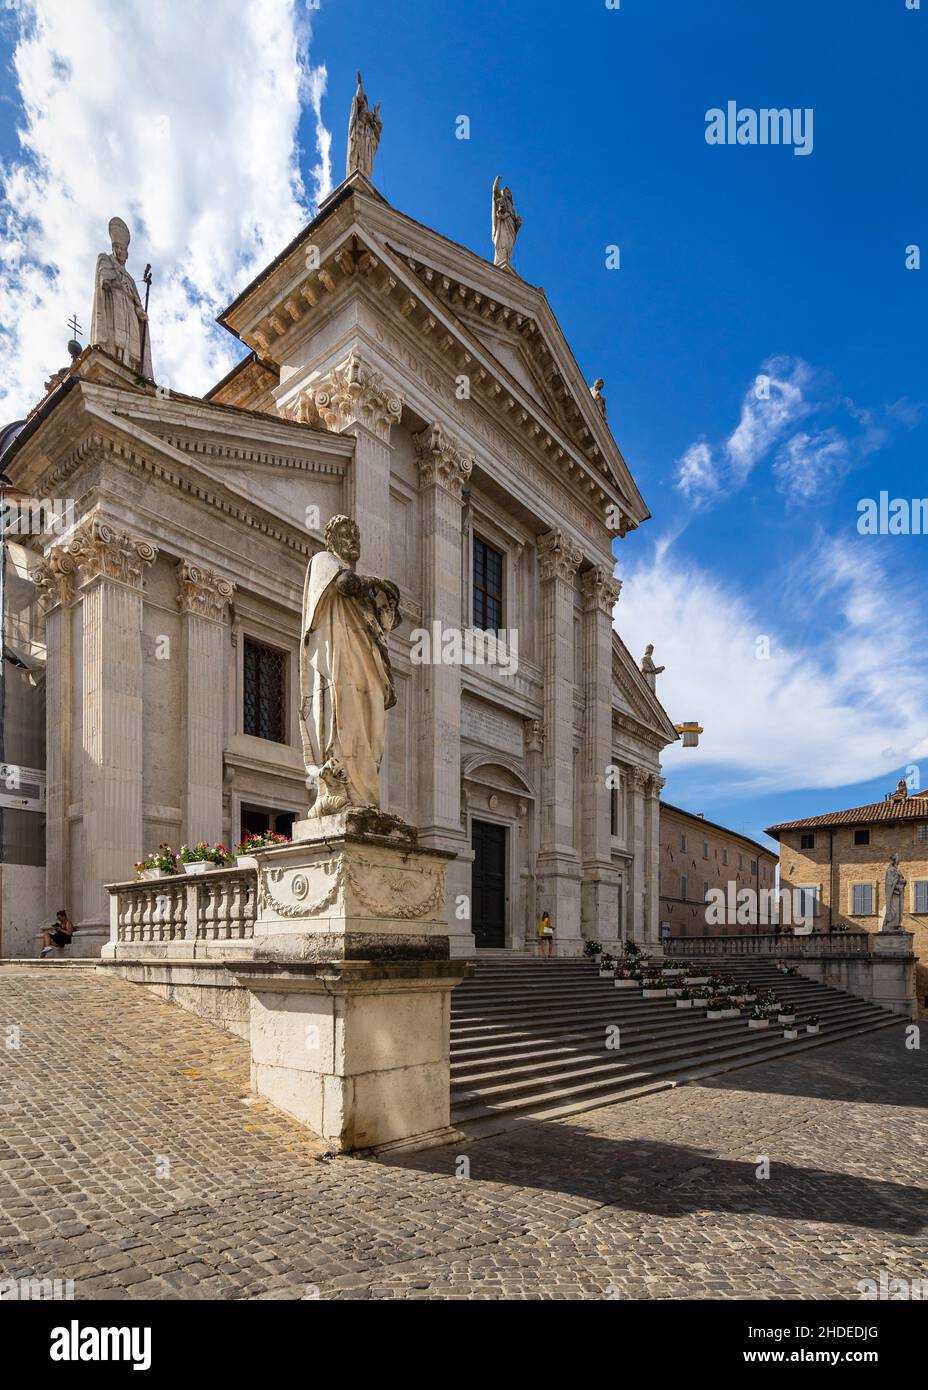 Exterior of Urbino Cathedral built in neoclassical style locate in Duca Federico square, Marche, Italy Stock Photo